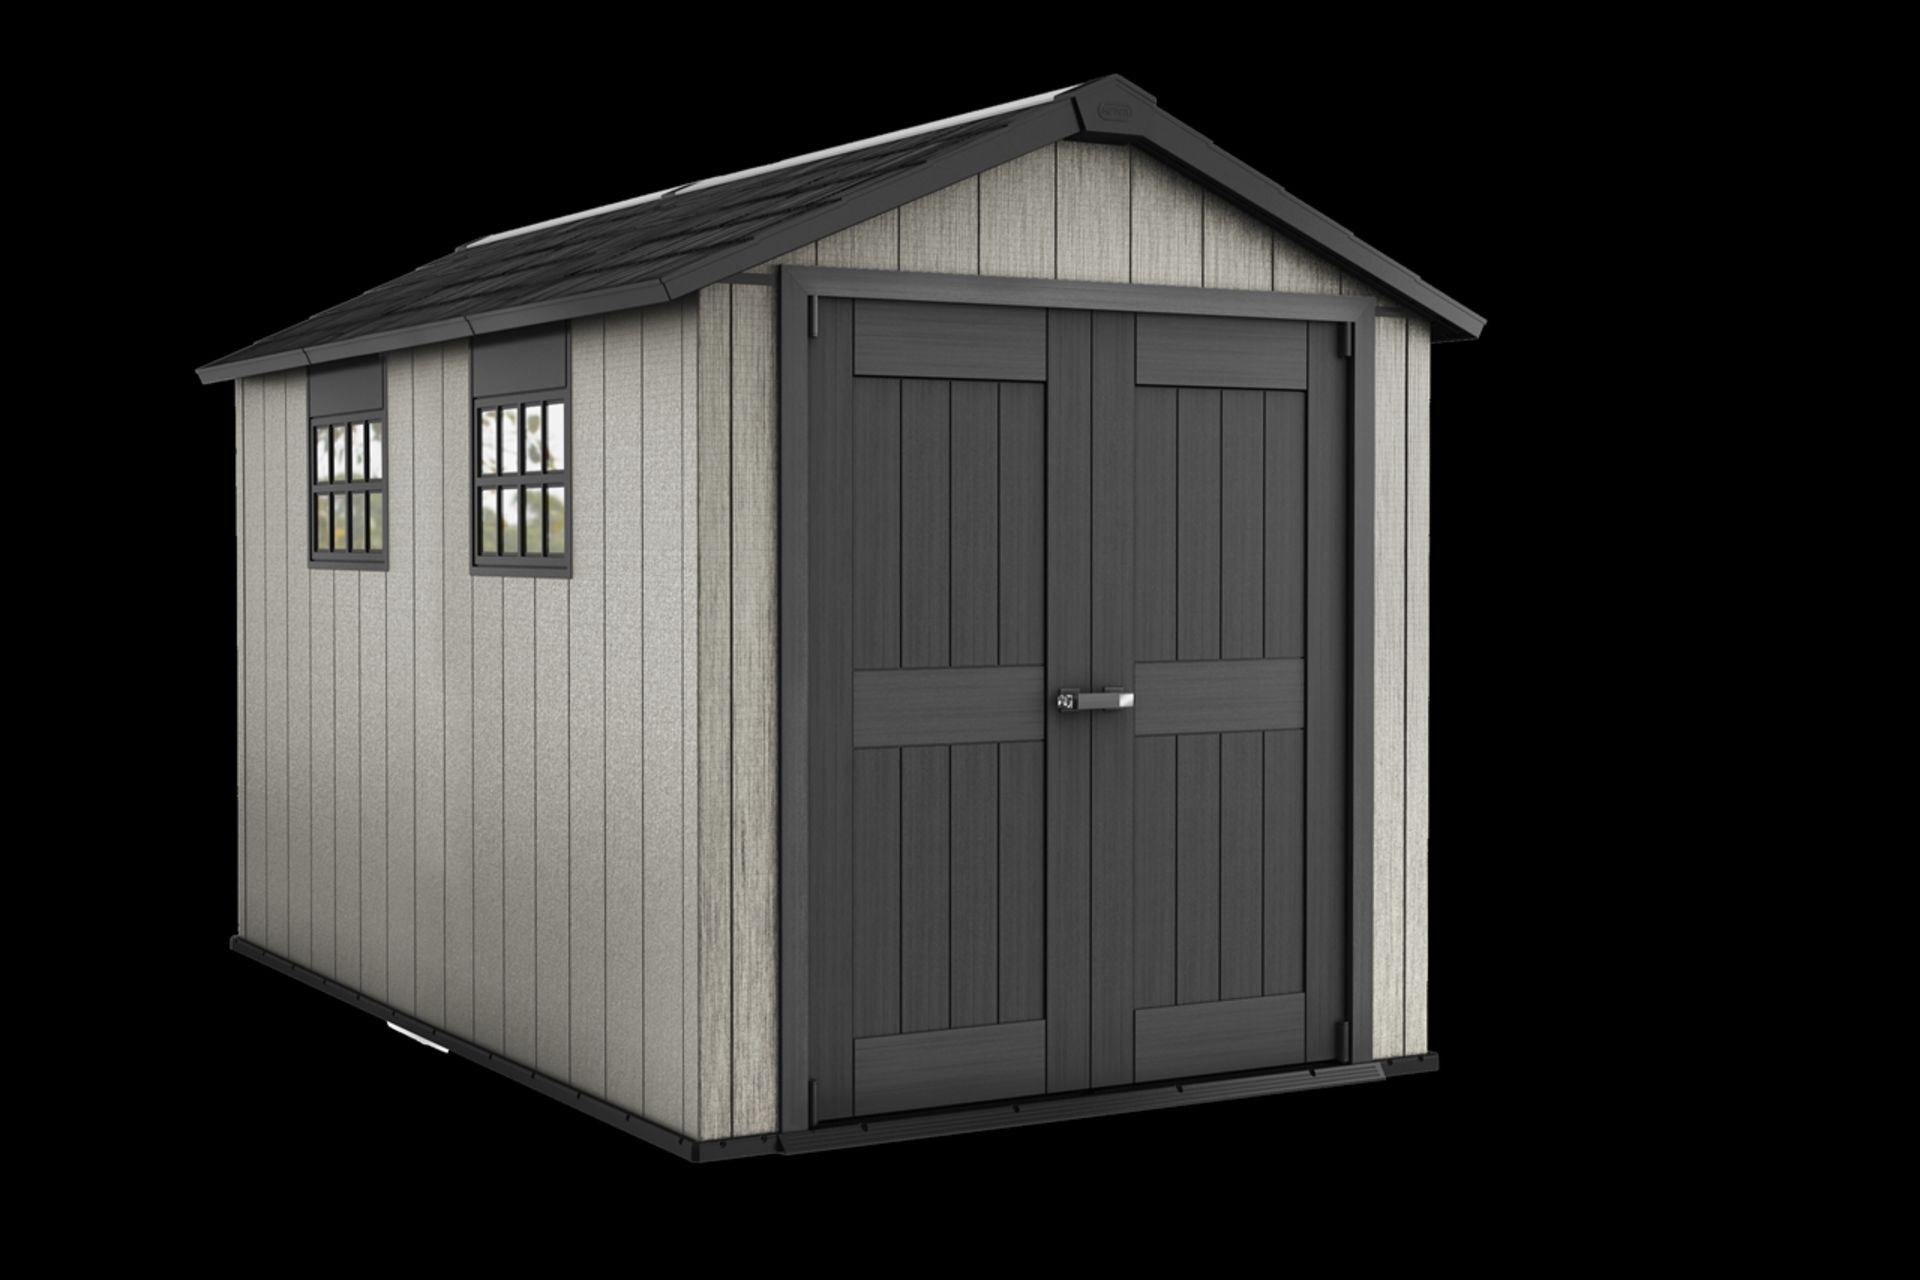 Keter Oakland 7511 7ft 6" x 9ft 4' RRP £1200 - Image 3 of 4